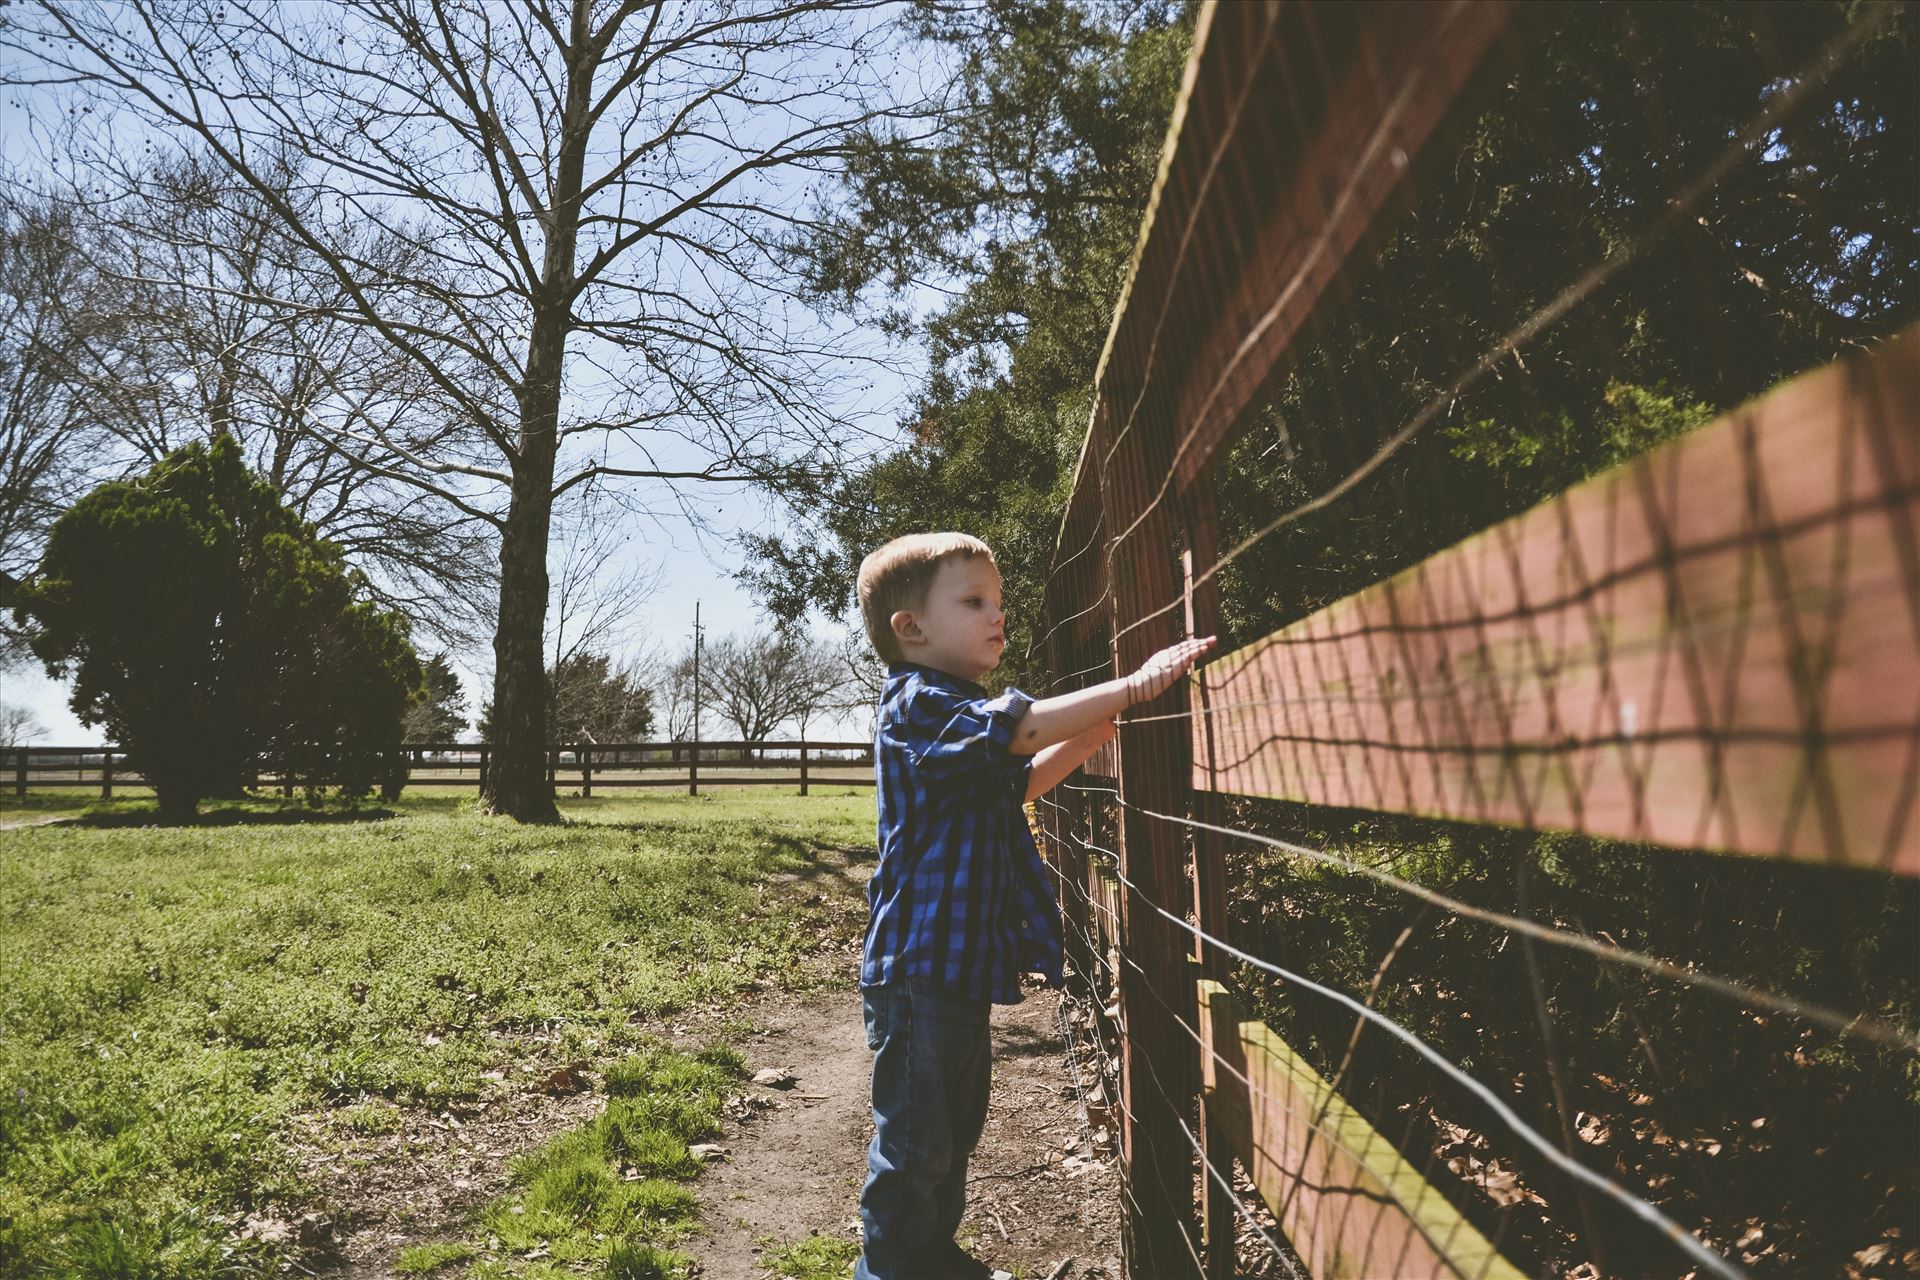 Looking through the fence -  by Unbound Photography